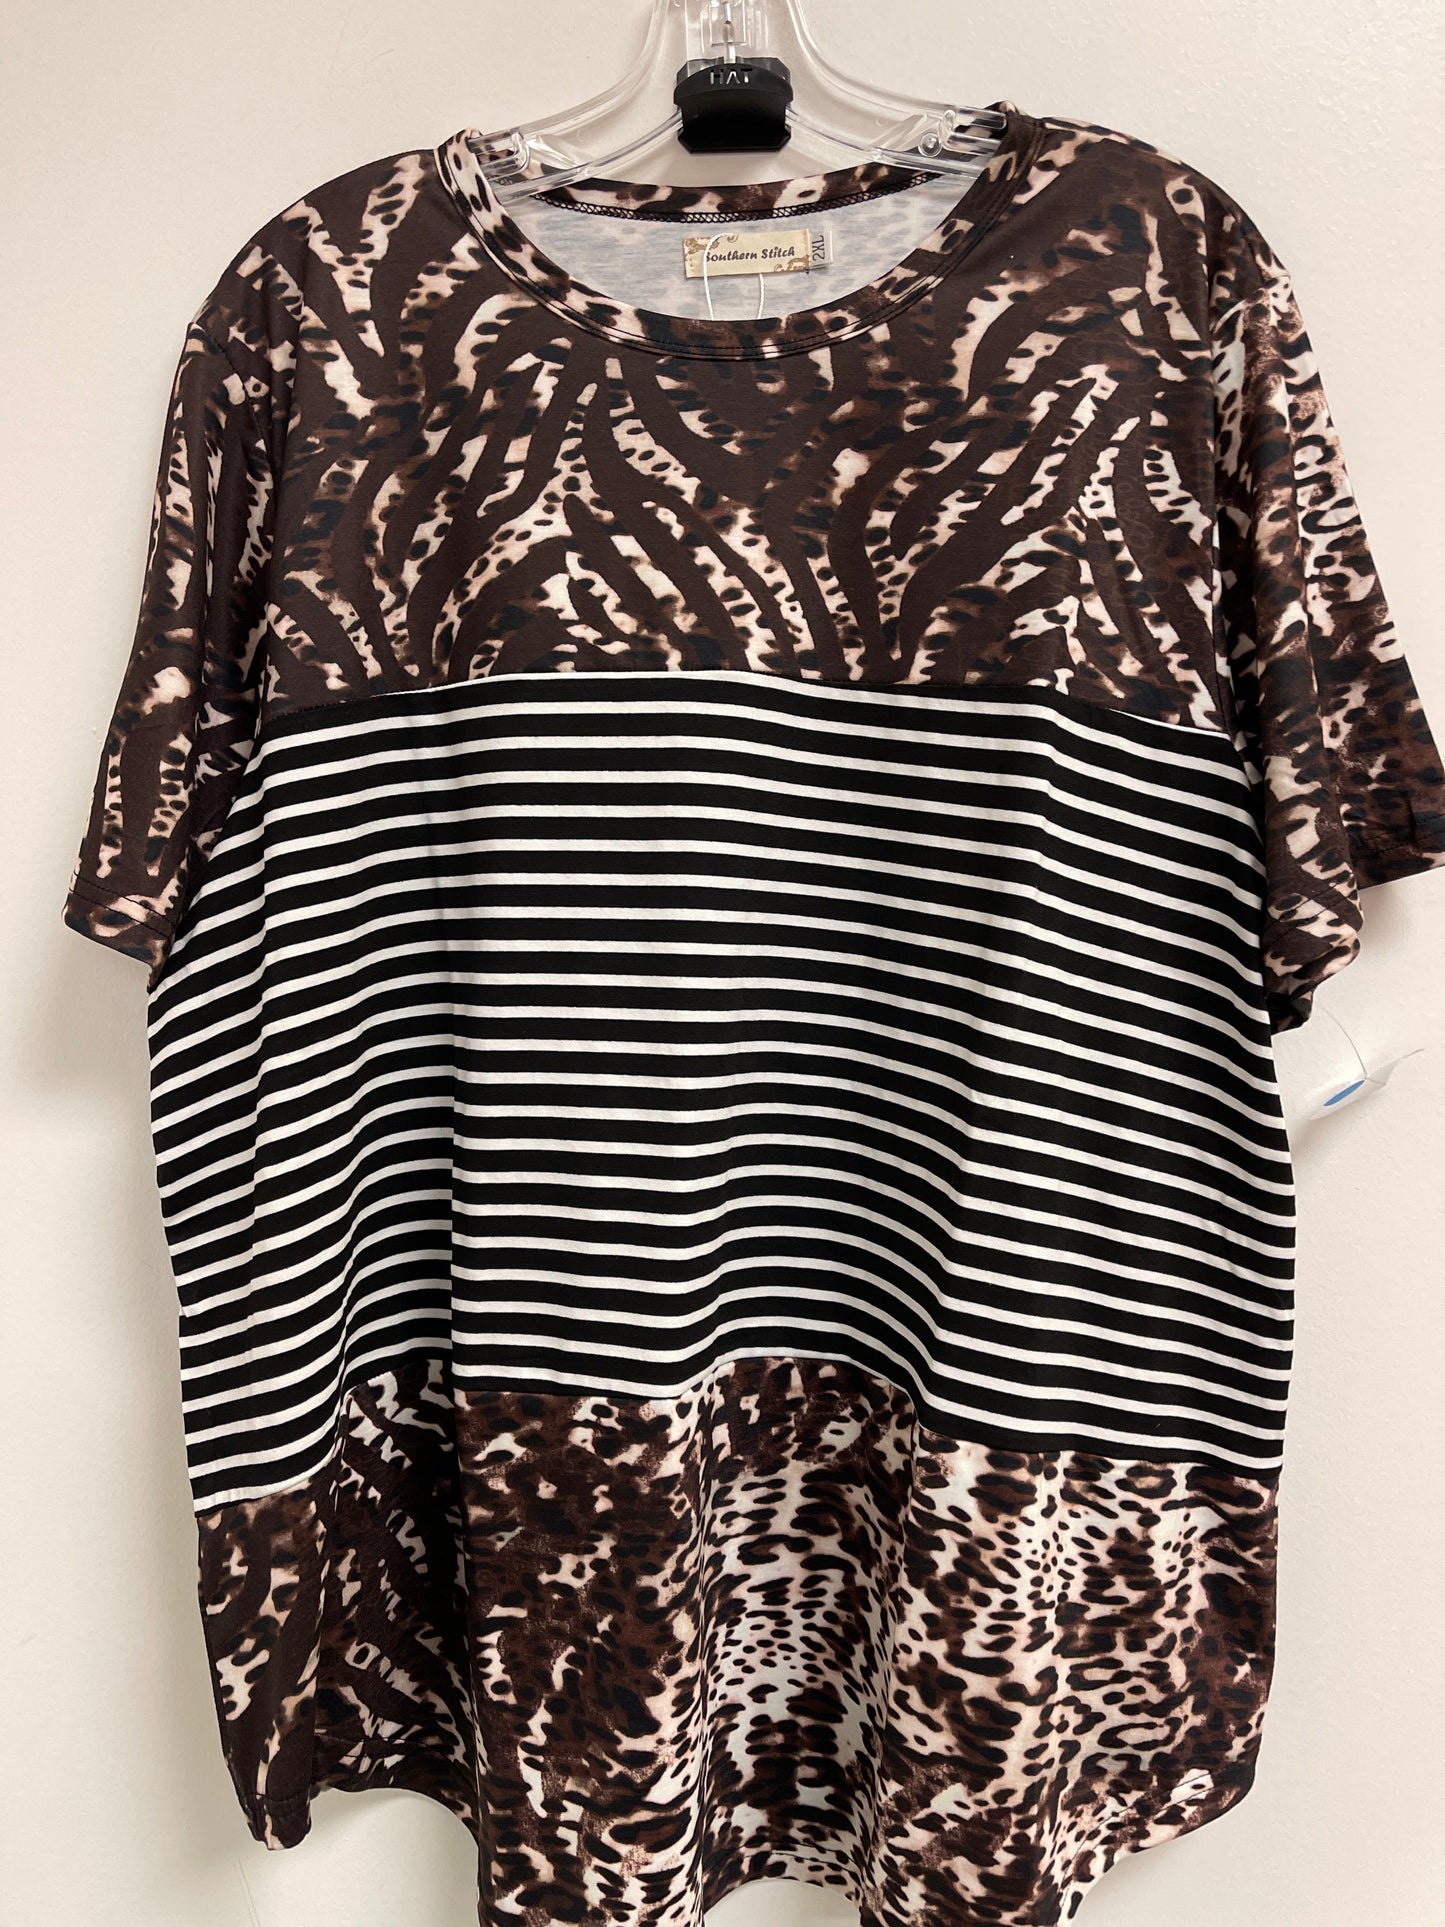 Animal Print Top Short Sleeve Clothes Mentor, Size 2x